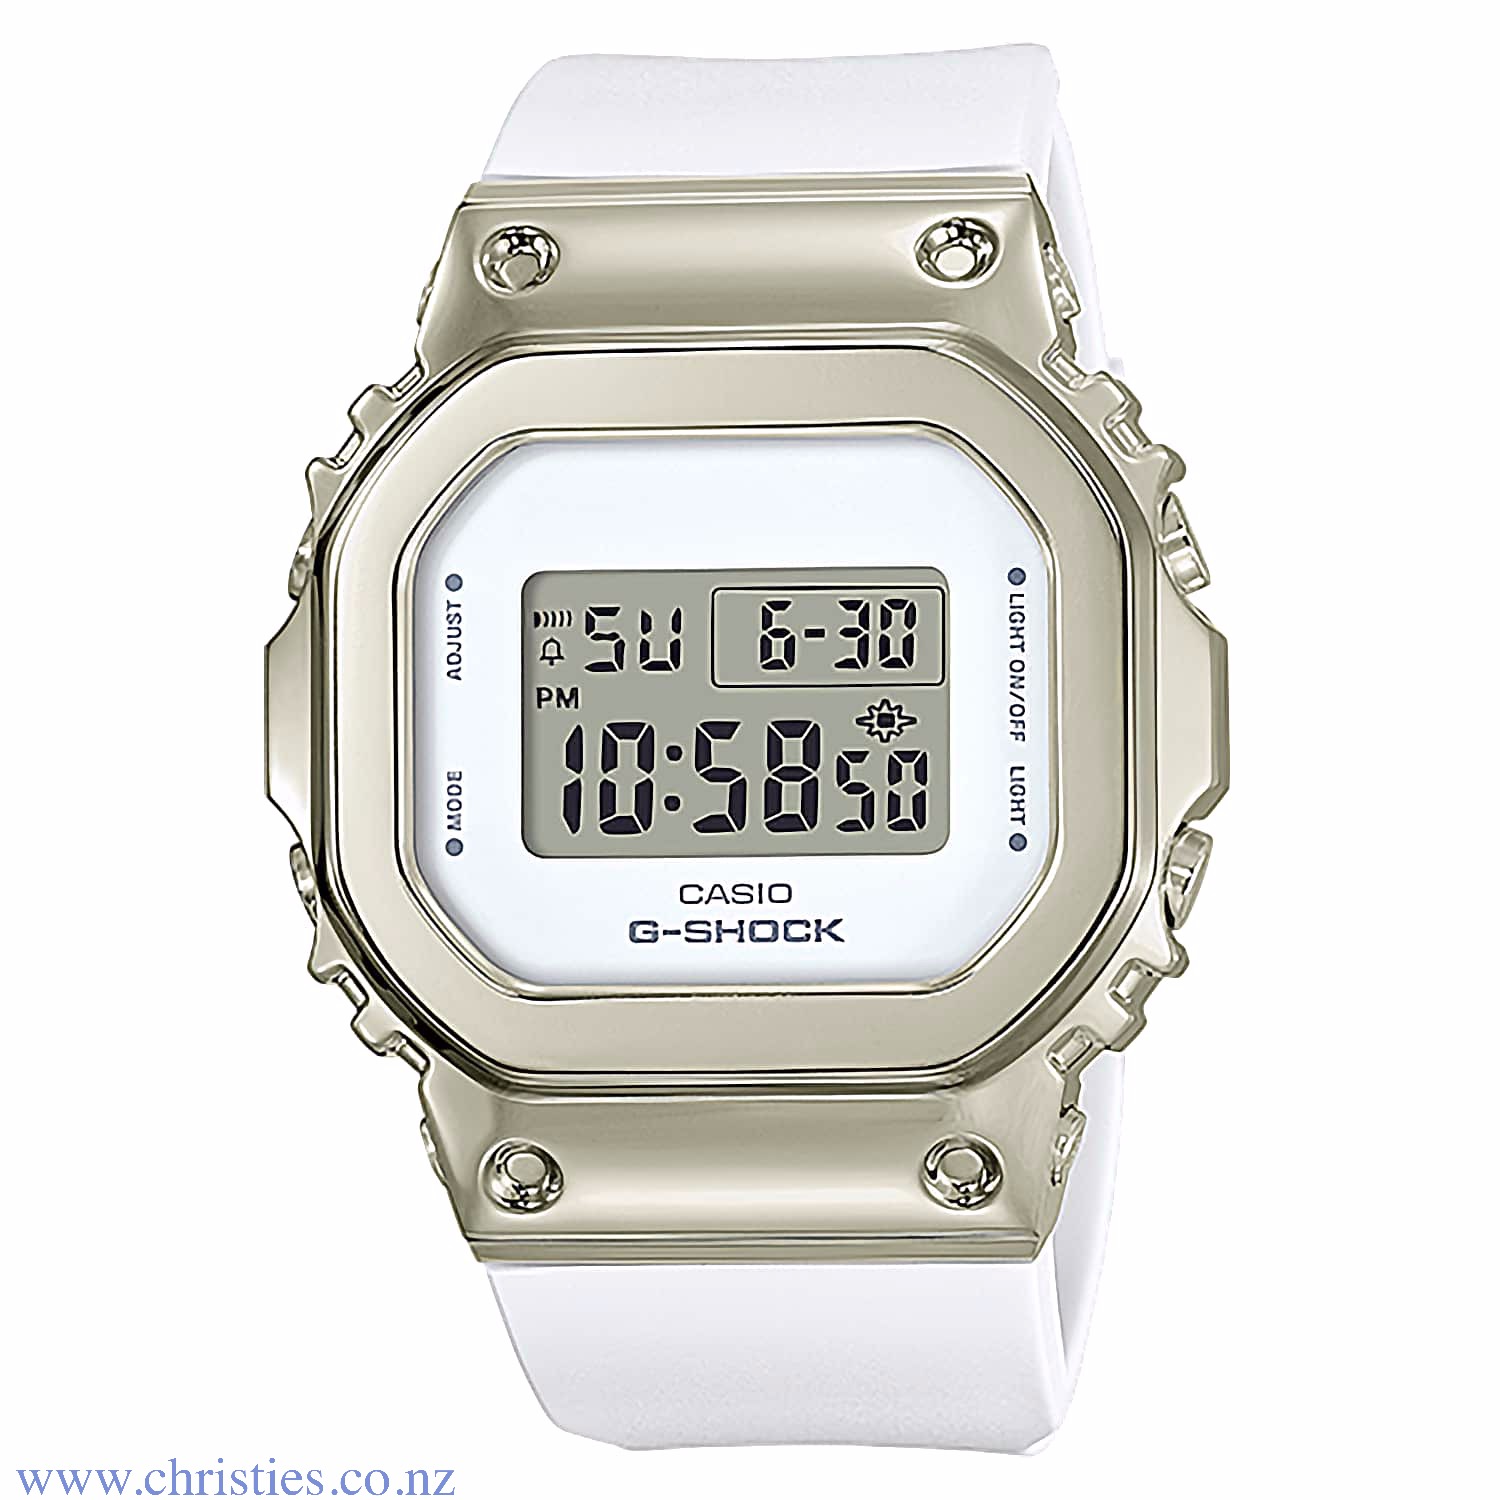 GMS5600G-7 G-Shock Womens Metal  Bezel Watch. Introducing new compact G-SHOCK models that are great choices for women who prefer mannish G-SHOCK styling. The iconic square design of the 5600 Series with a metal-covered bezel. All the shock resistance of t